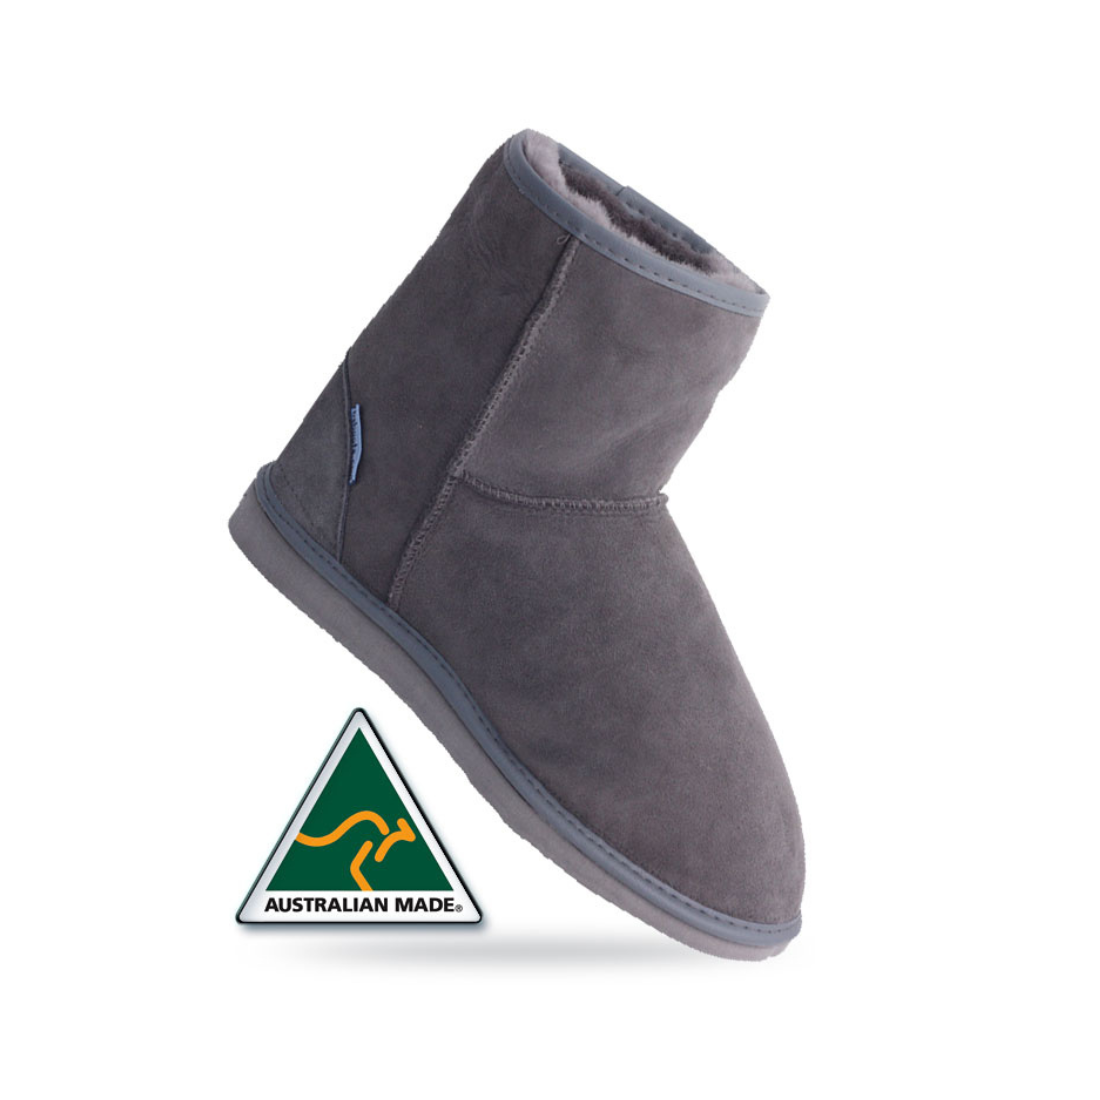 Australian made blue sheep ankle ugg boots in charcoal grey